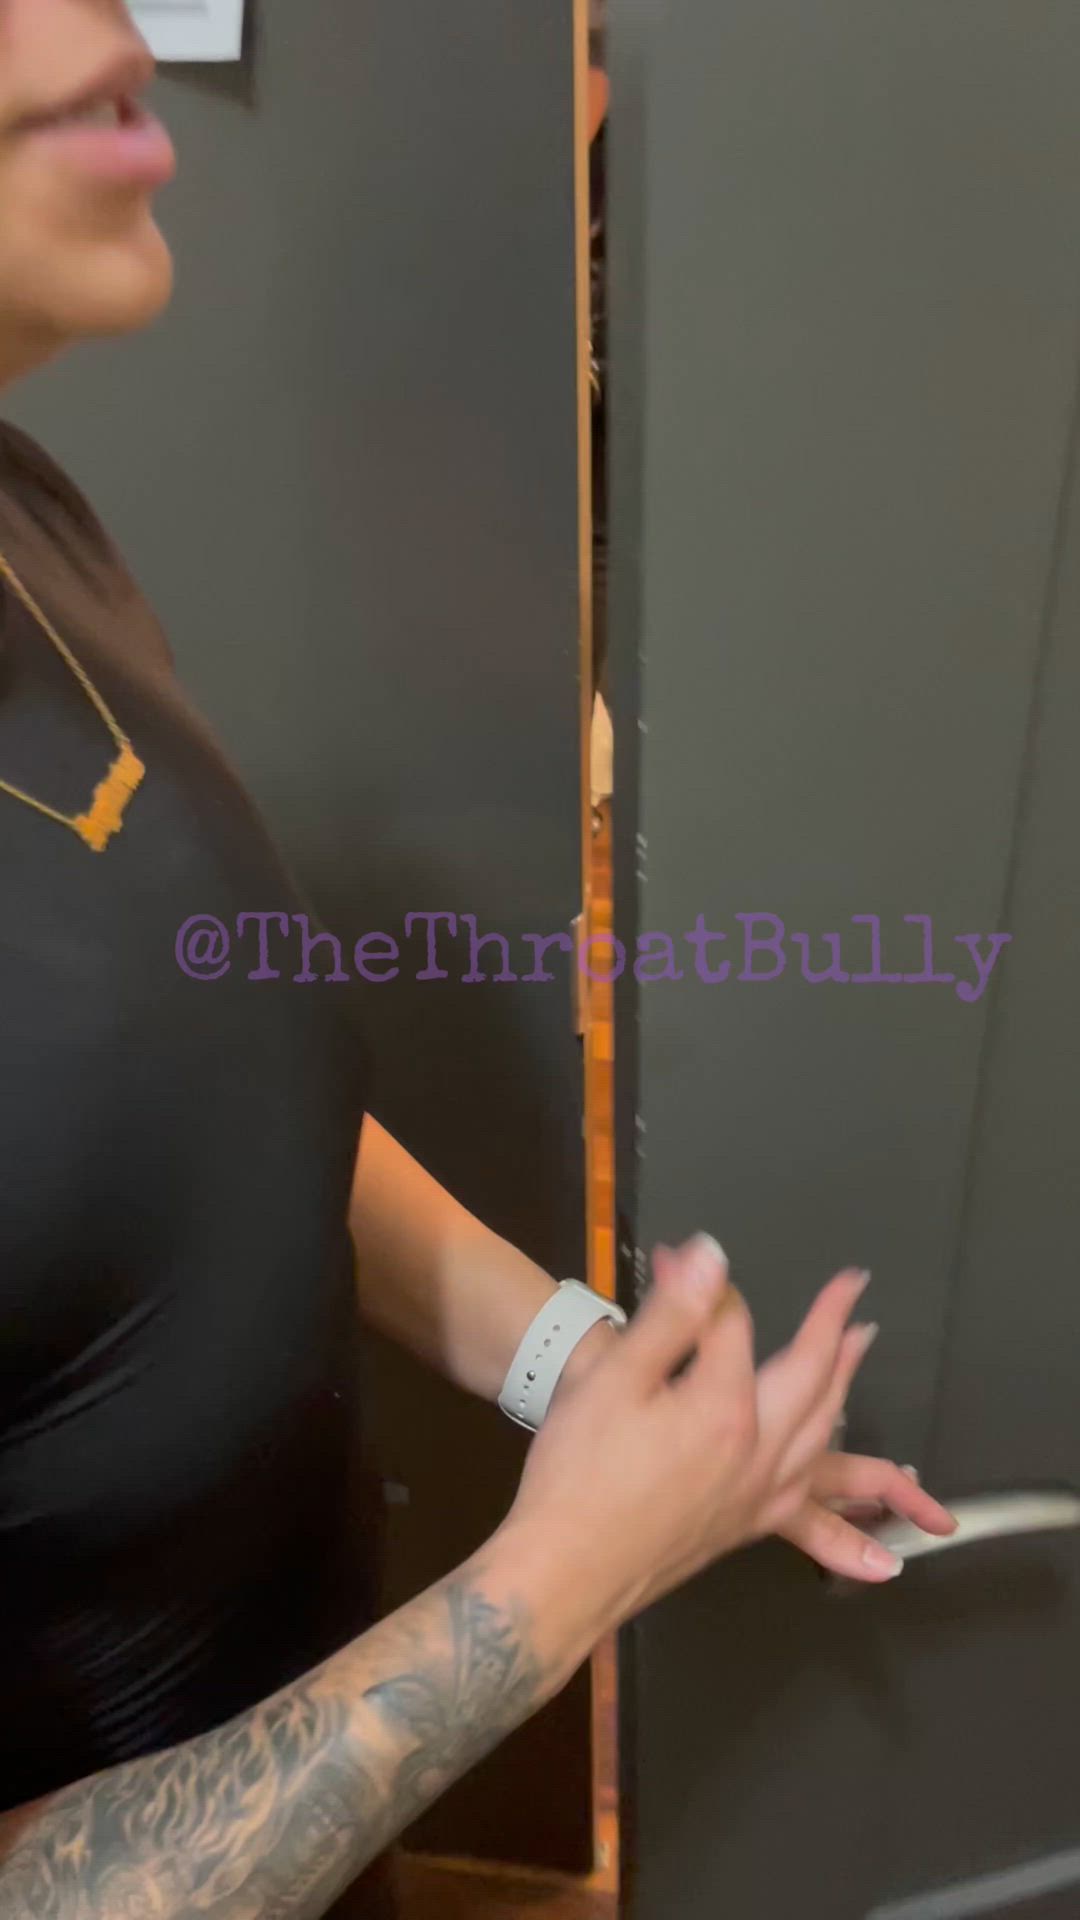 Amateur porn video with onlyfans model The throat bully <strong>@thethroatbully</strong>